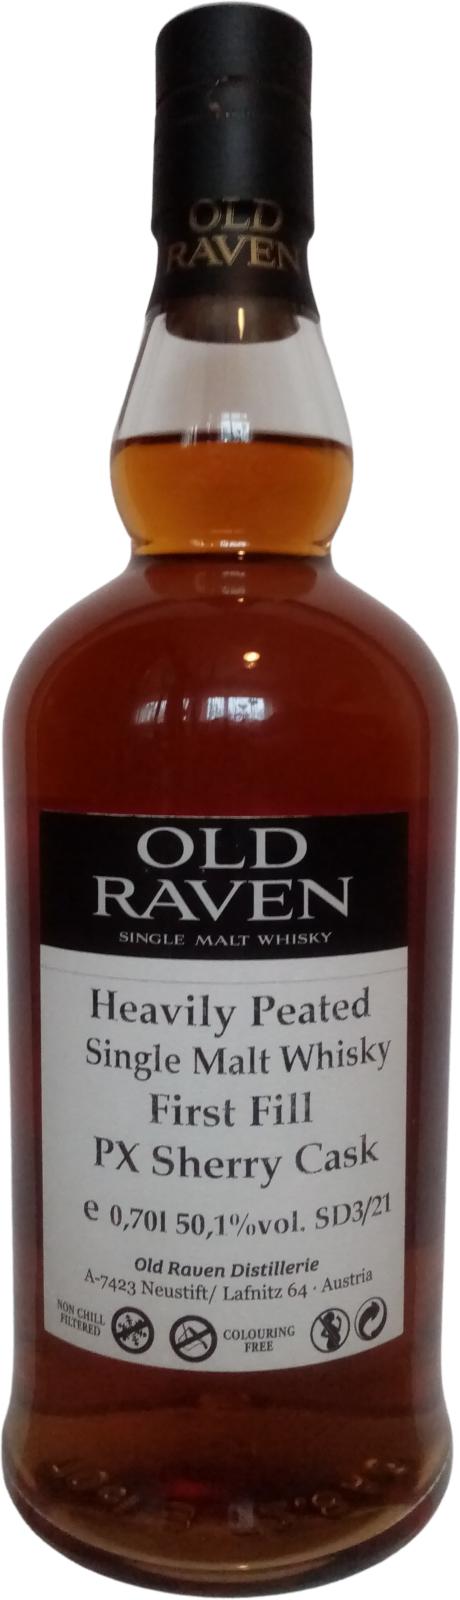 Old Raven 05-year-old